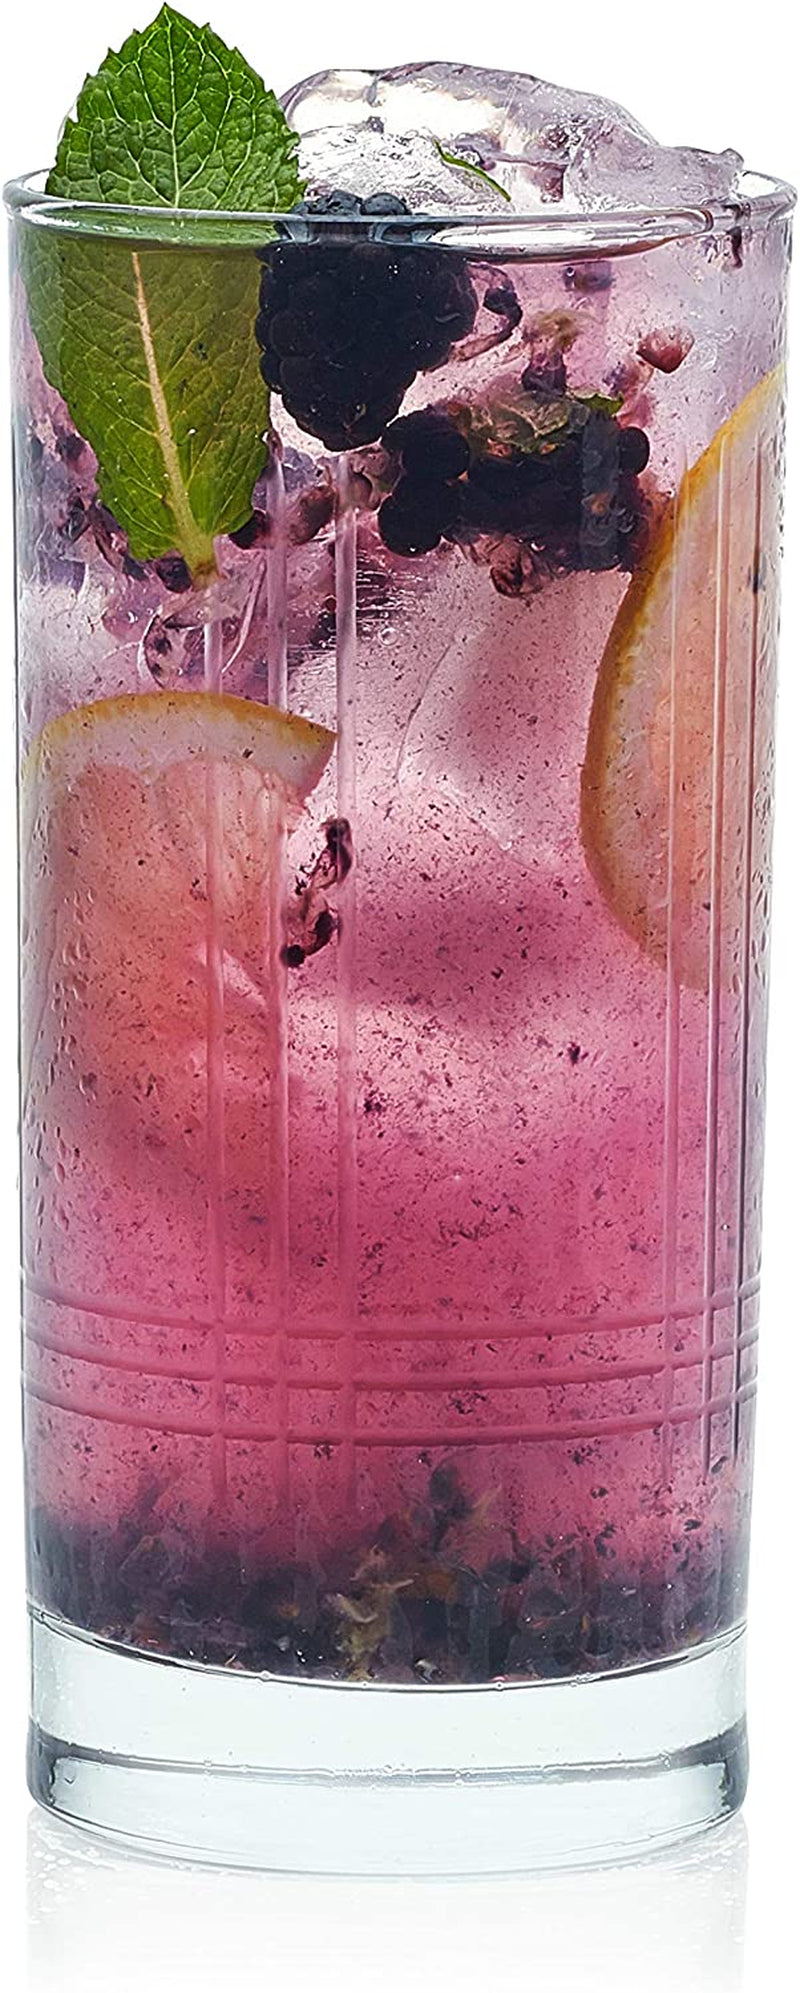 Libbey Cut Cocktails Scribe Tumbler Glasses, 15-Ounce, Set of 8 Home & Garden > Kitchen & Dining > Tableware > Drinkware Libbey Scribe Tumbler Clear (15 oz)  